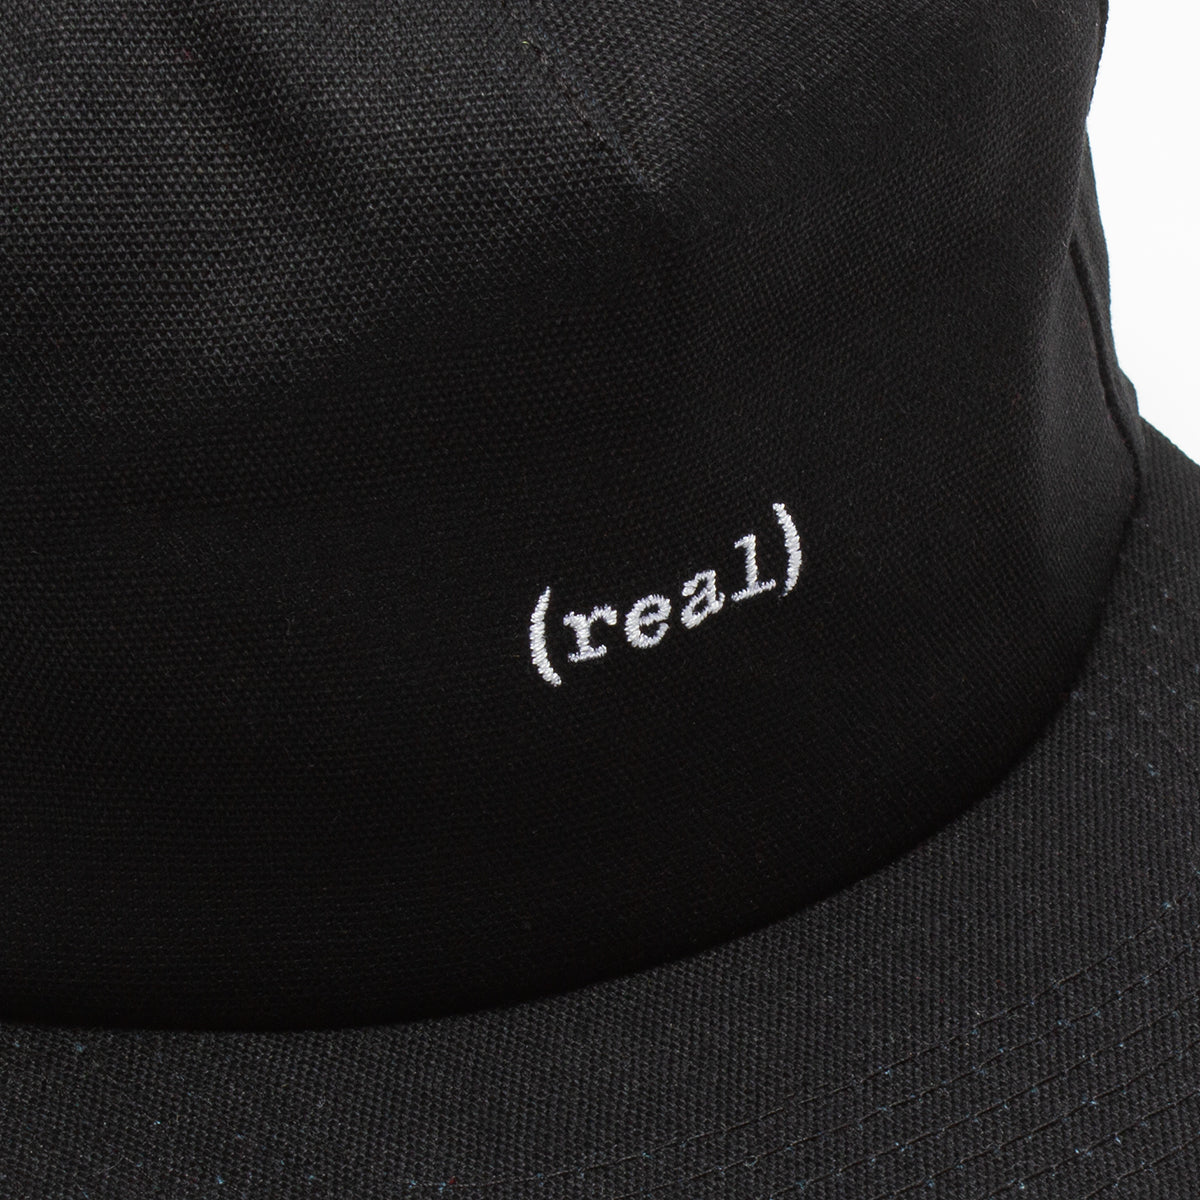 Real | Lower Hat Style # 50021052H00 Color : Black